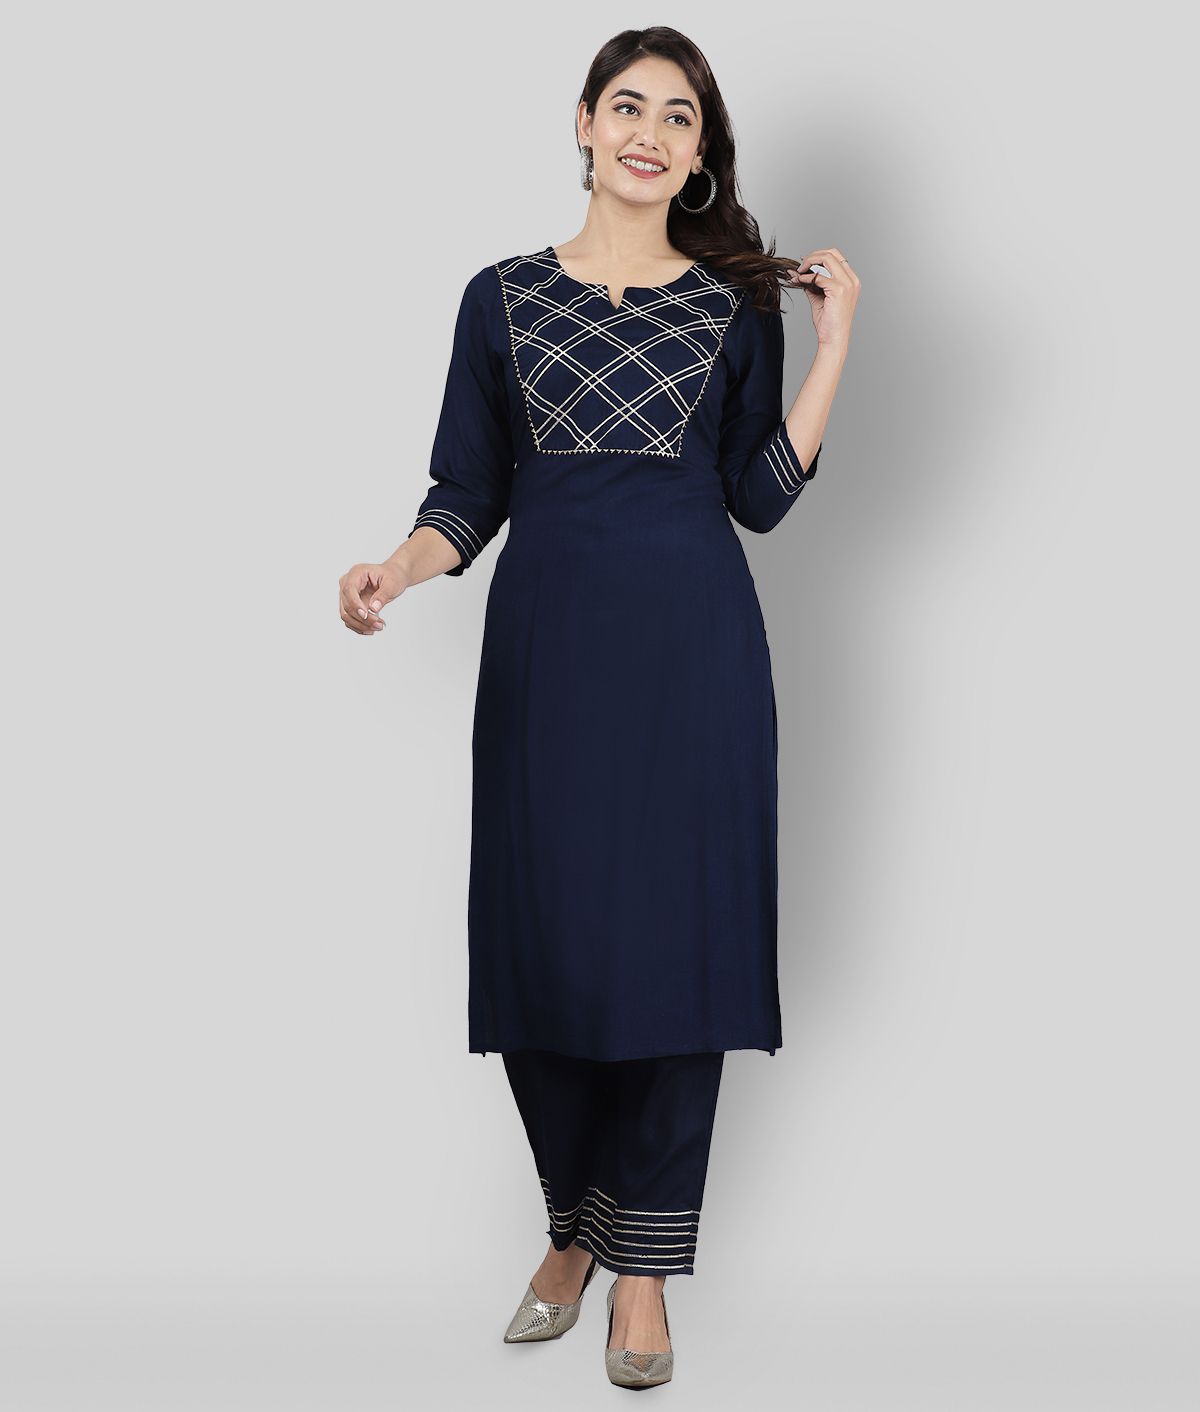     			Doriya - Navy Straight Rayon Women's Stitched Salwar Suit ( Pack of 1 )